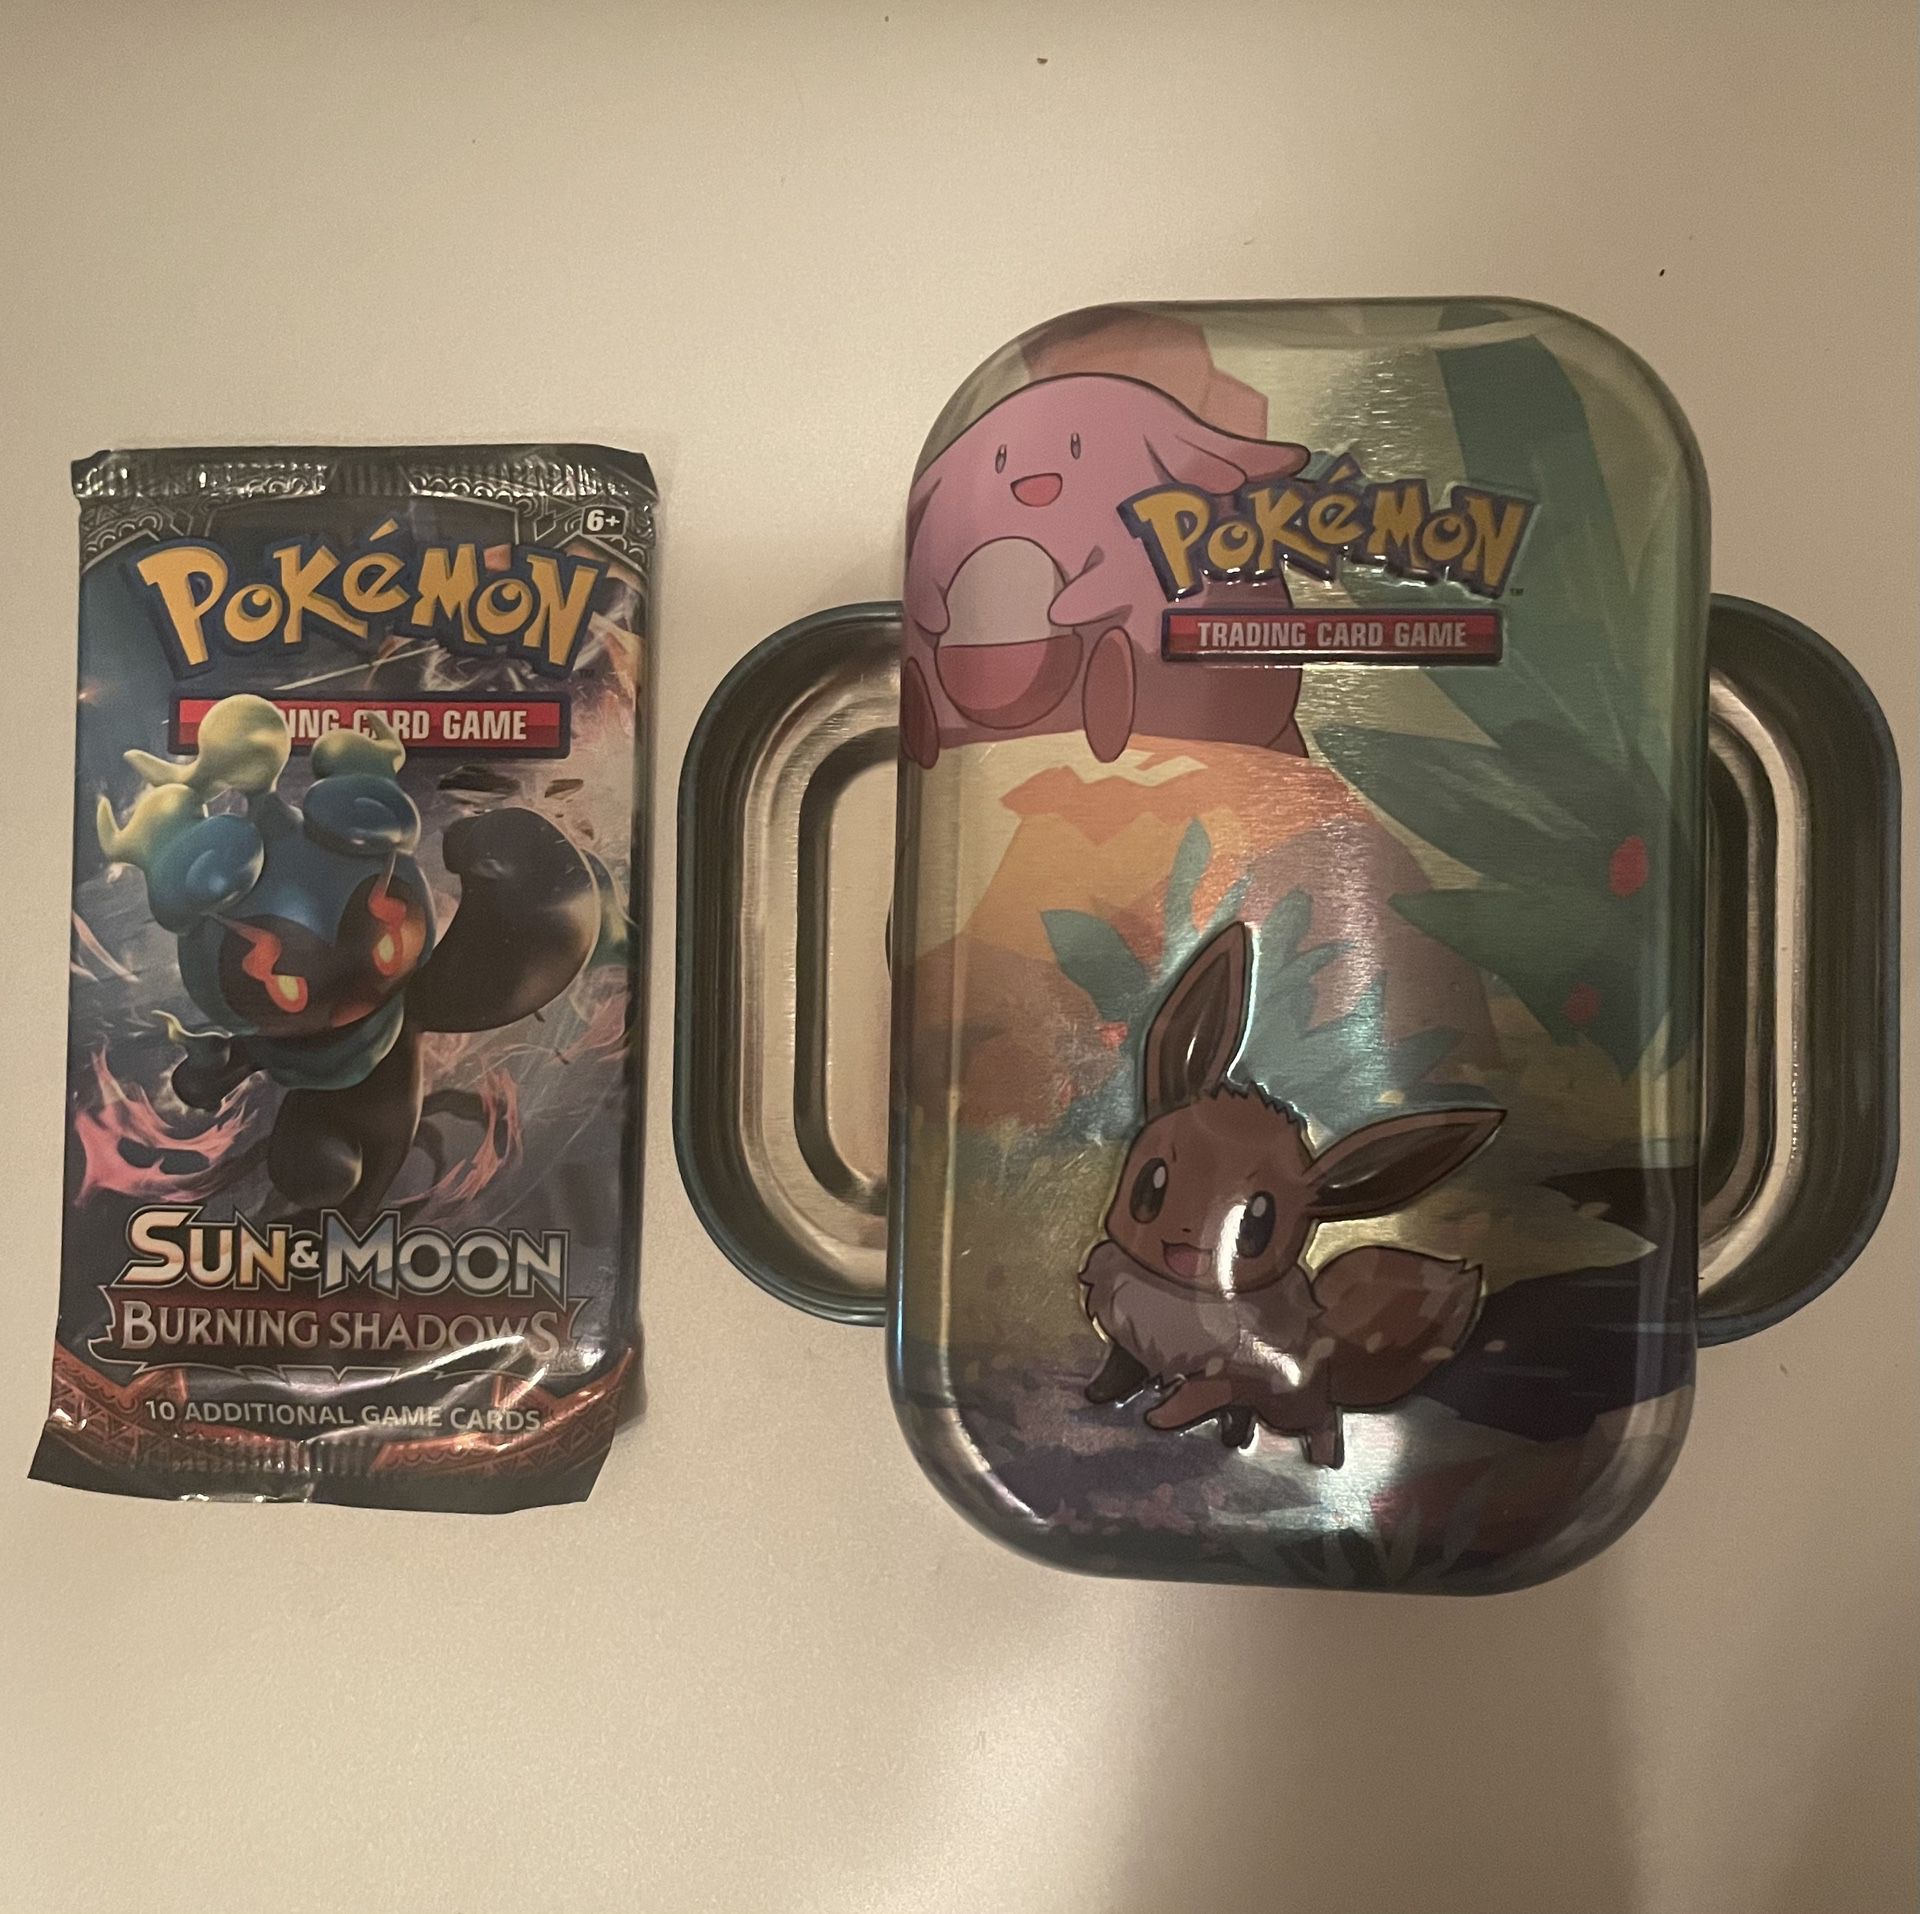 Sealed 2017 Pokémon TCG Sun & Moon Burning Shadows Booster Pack PLUS an empty Pokemon Galar Tins - all in great condition. PSA 10 Charizard?